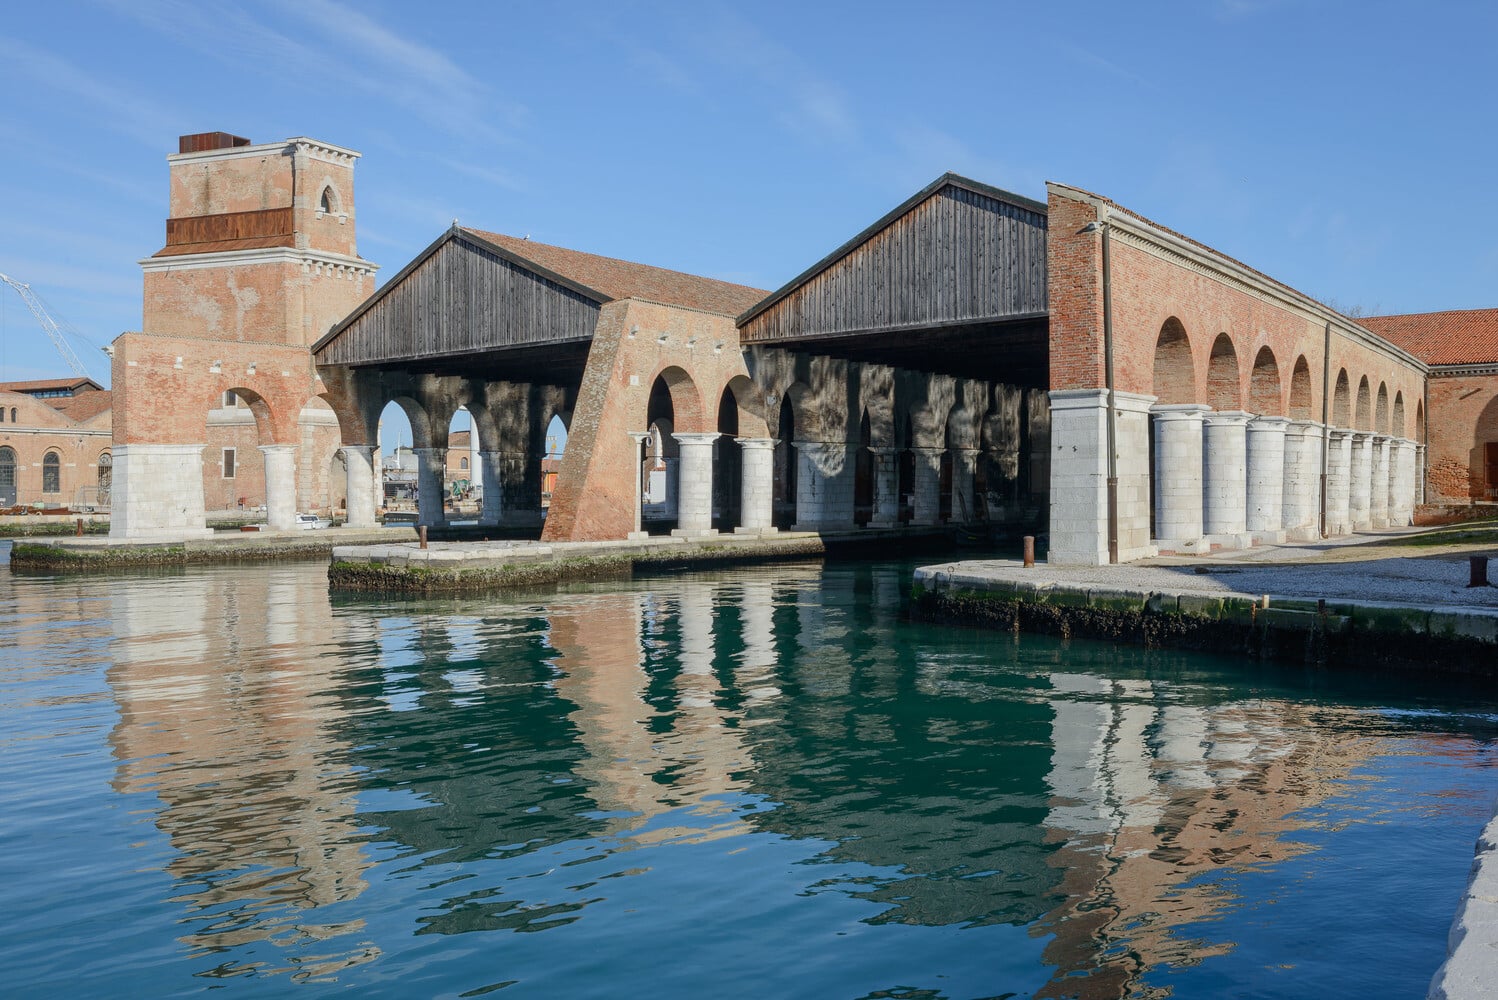 The title "intelligens" will be the 19th Architecture Biennale of Venice -